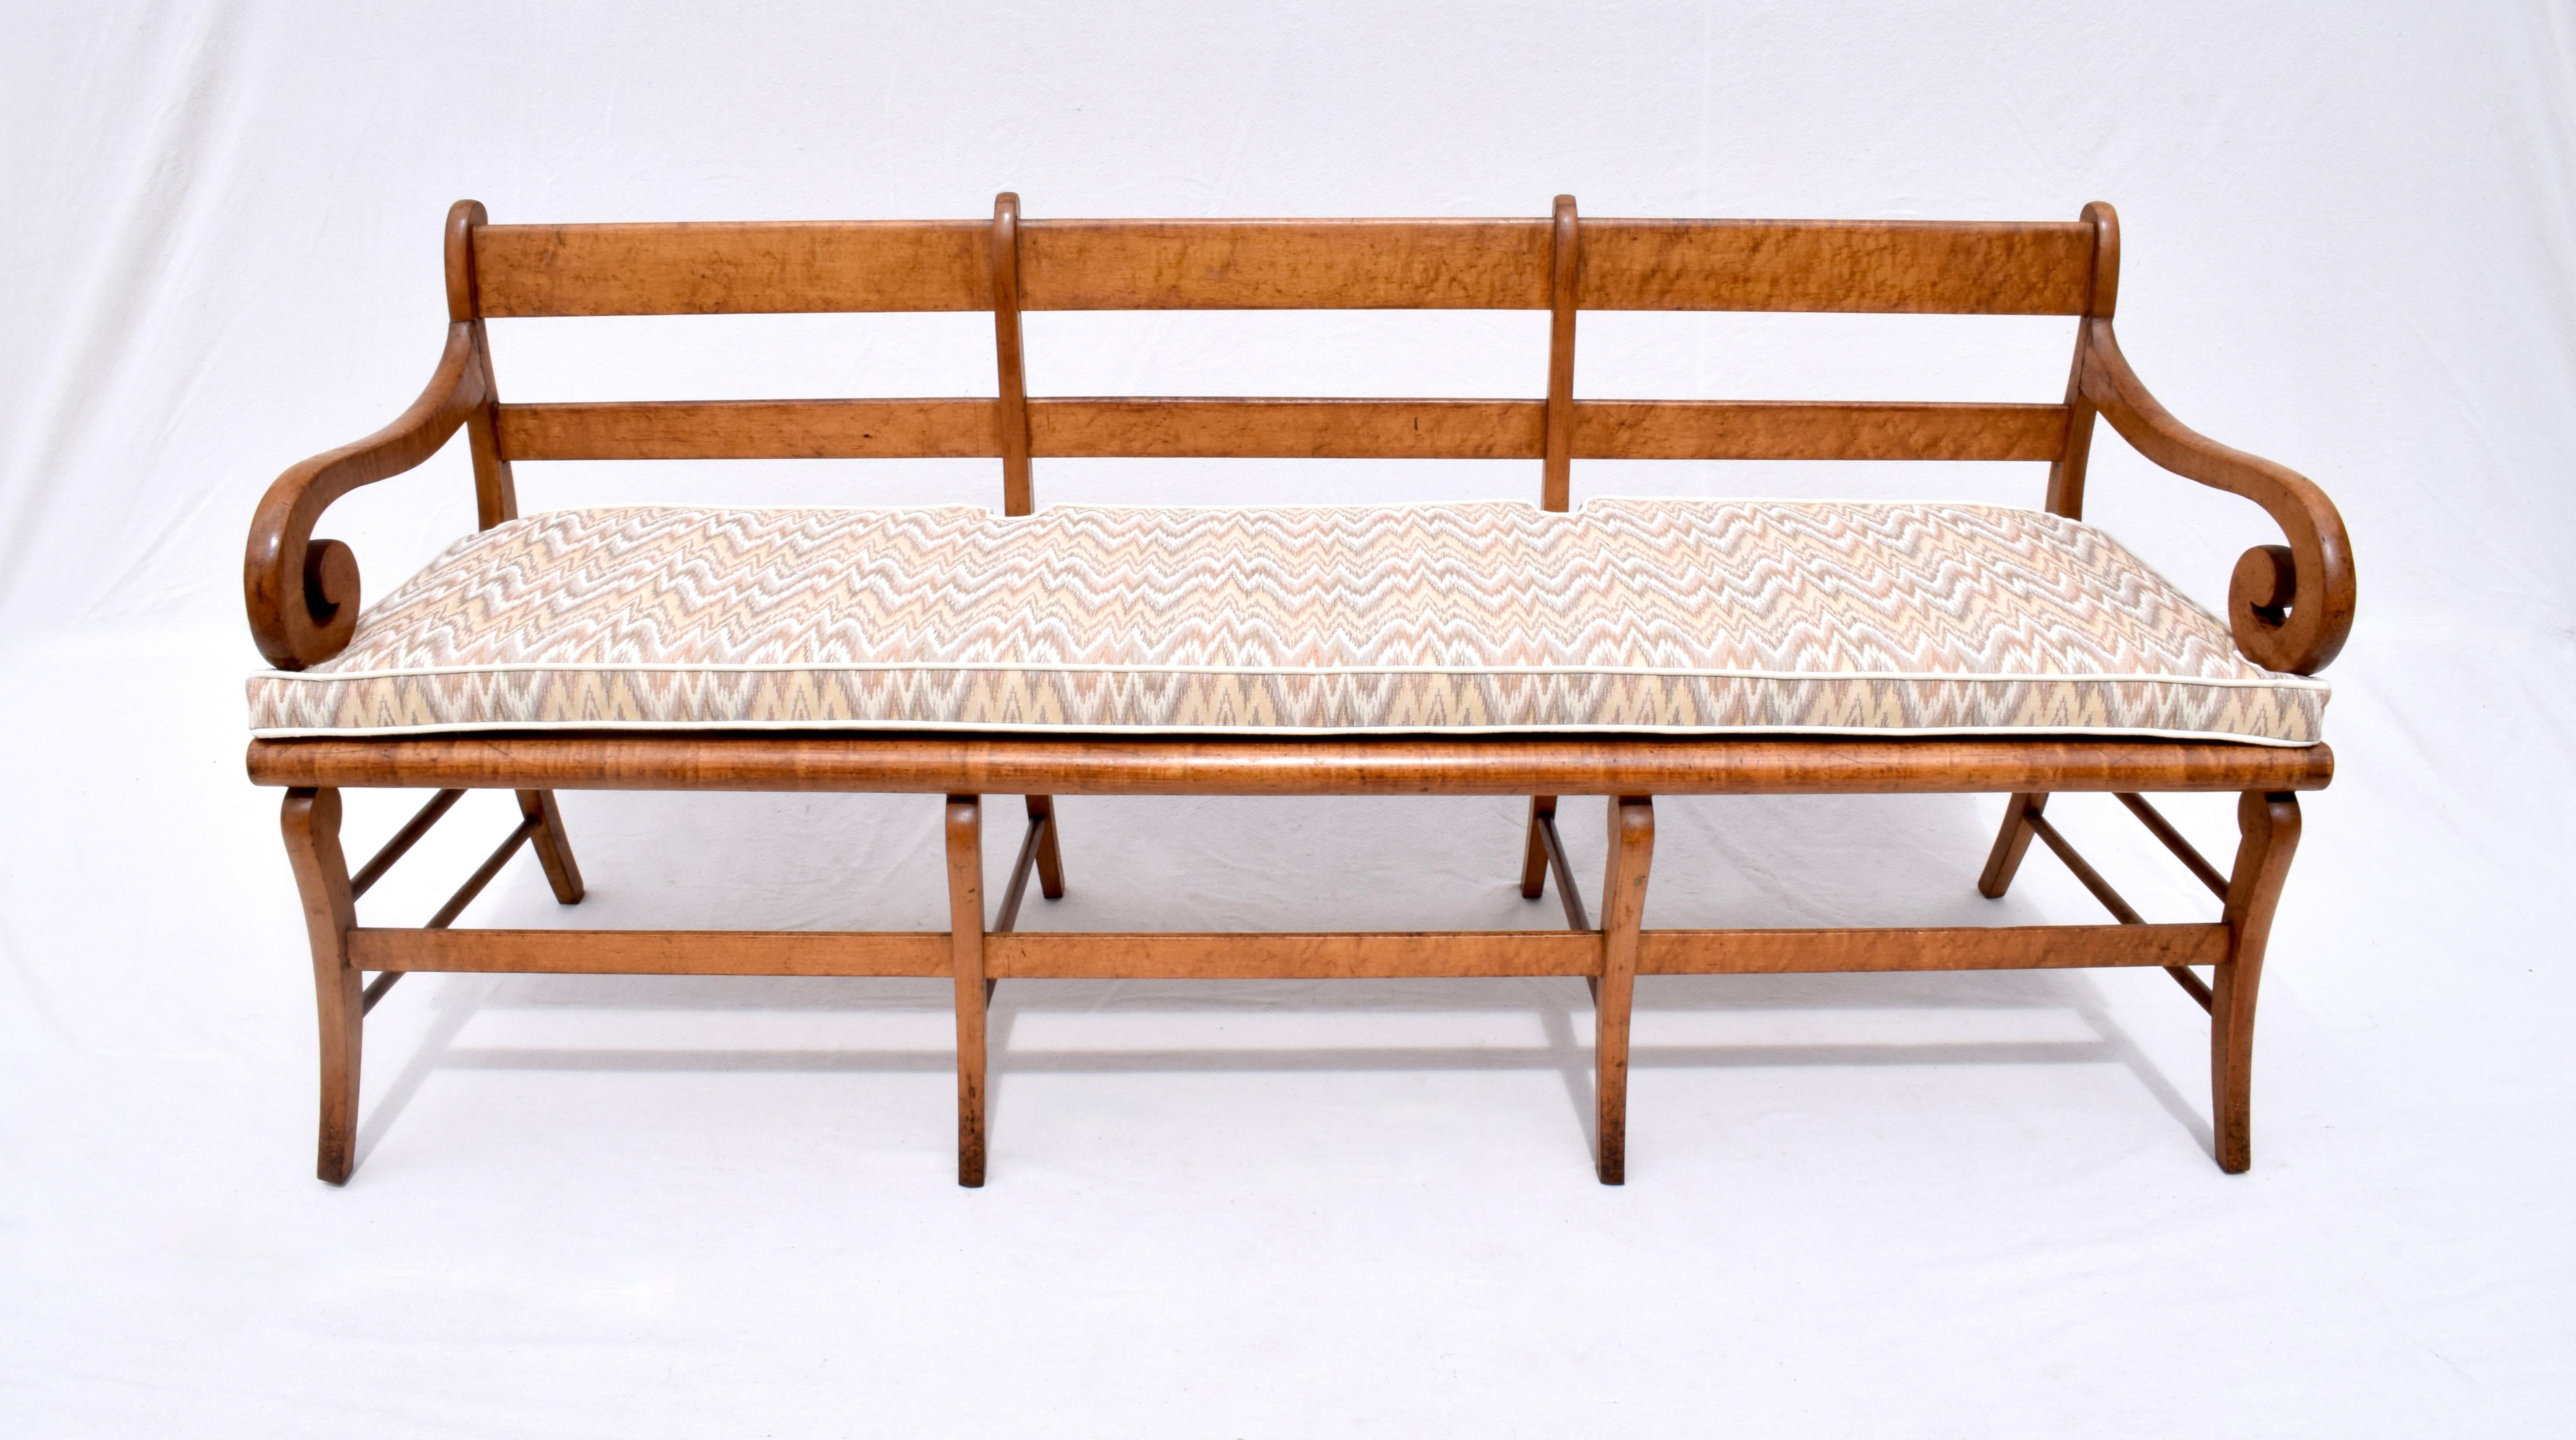 Scarcely seen figured bird’s-eye Maple Sabre leg early 19th century bench c. 1820-1840. Fully hand detailed with solid reinforced joinery, features include substantial French caned seat with new custom notched cushion in flame stitch woven